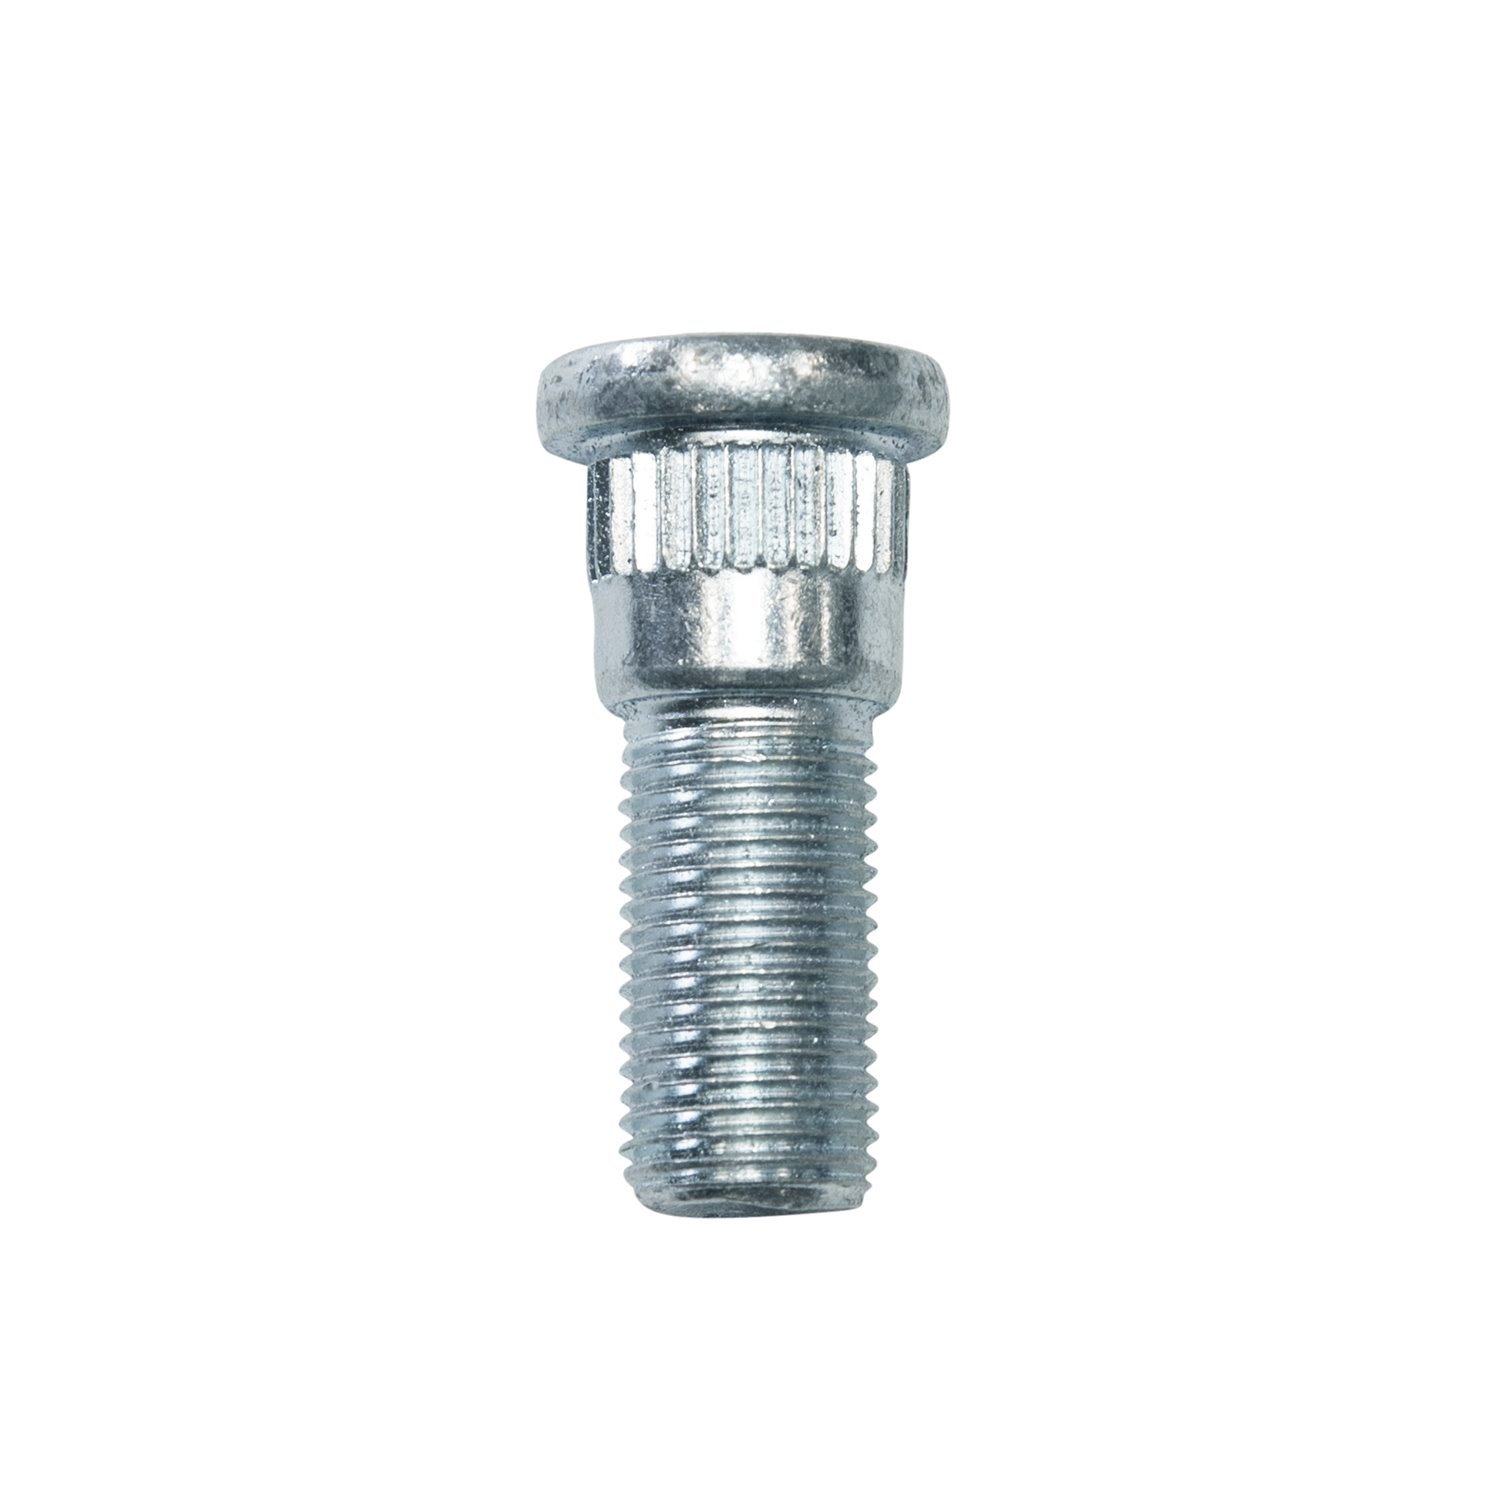 Replacement Axle Stud For Dana 44 & Model